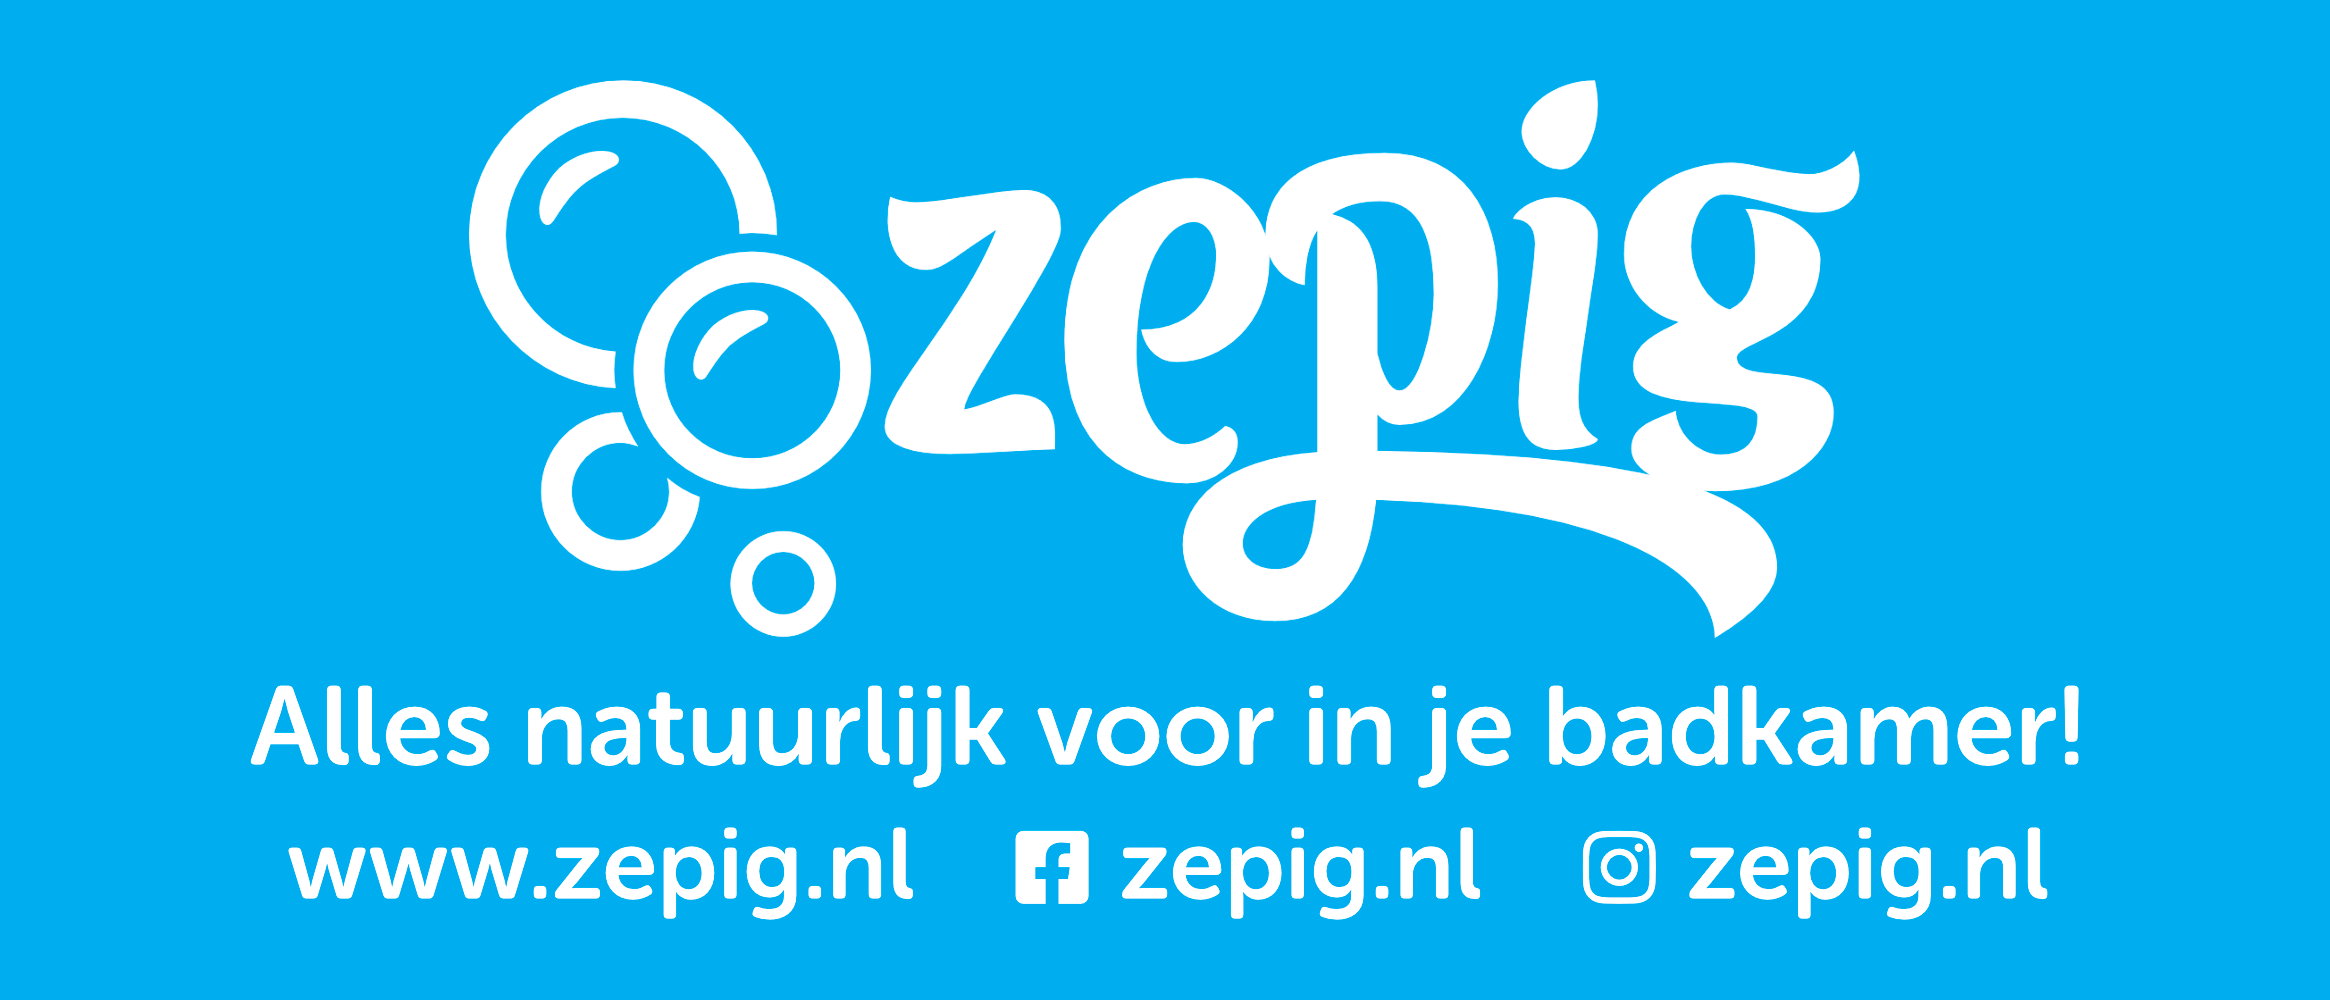 Zepig.nl